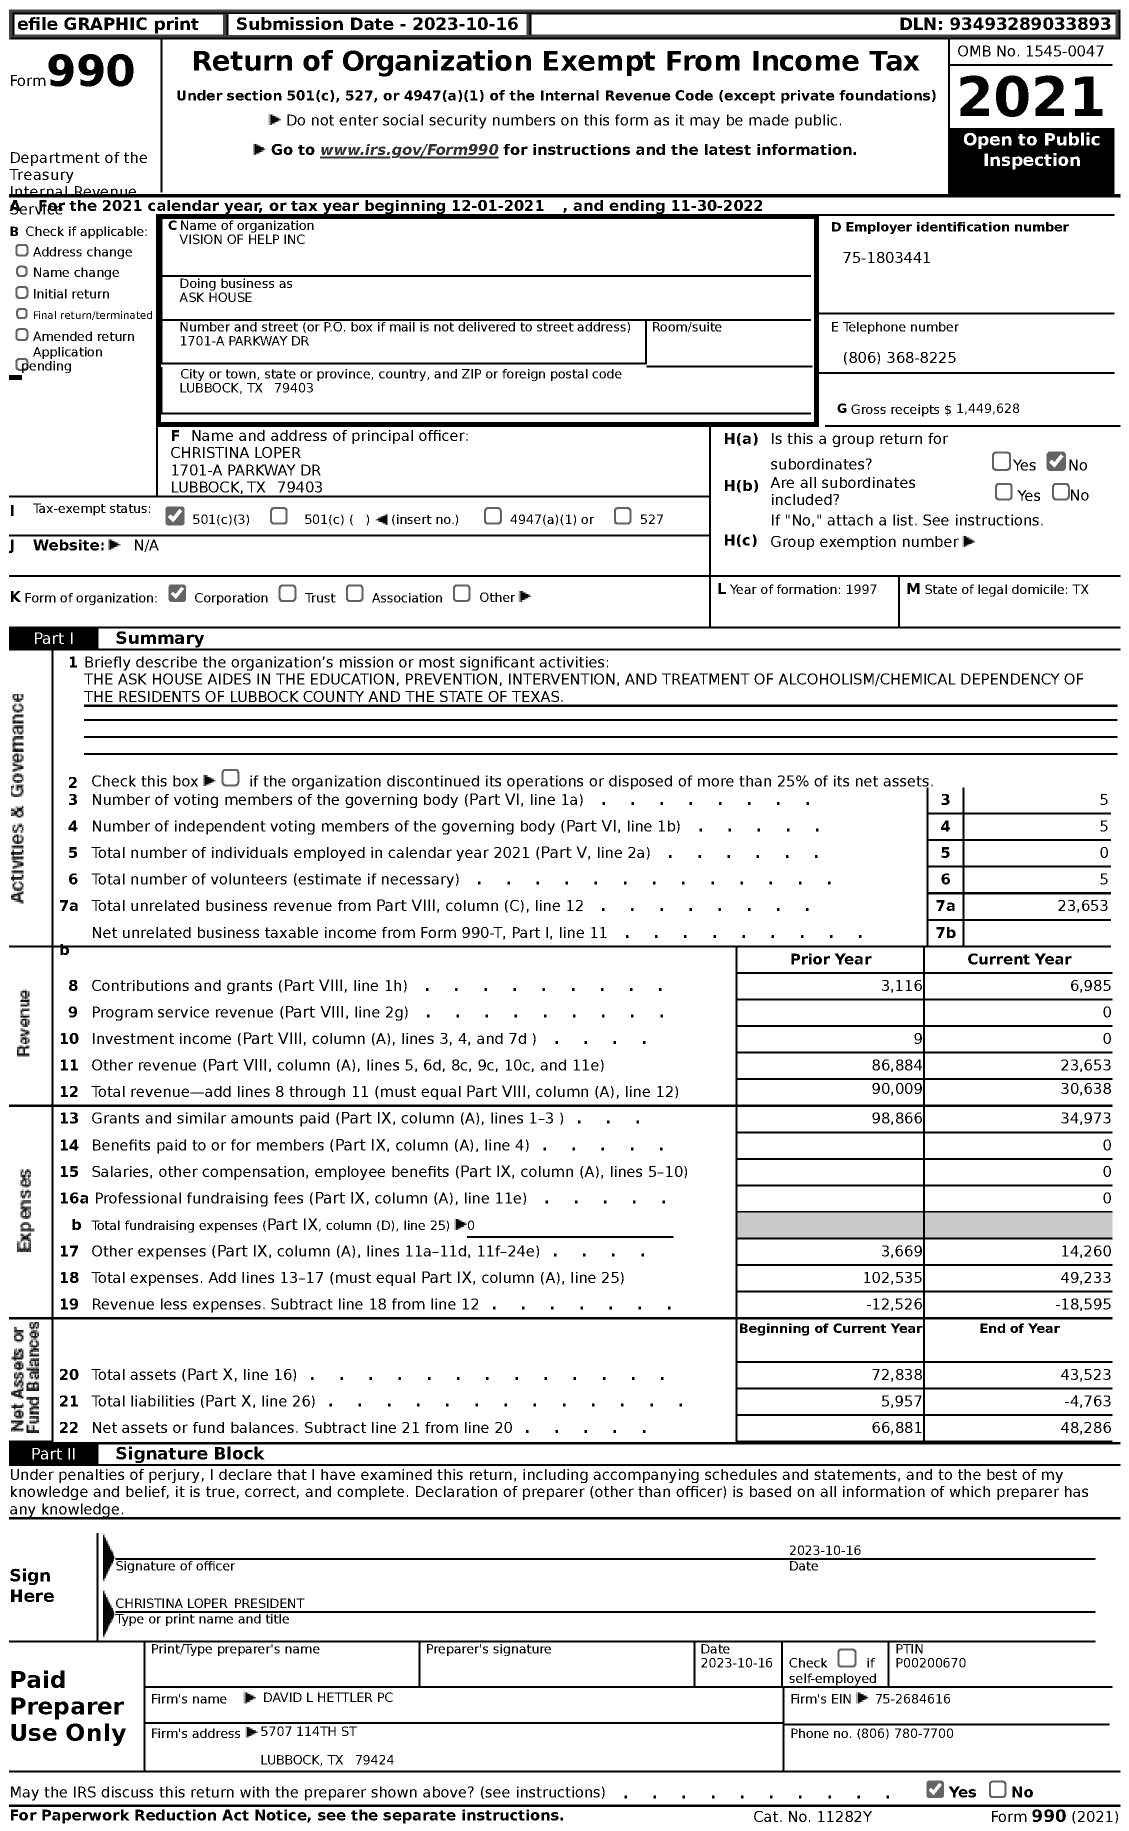 Image of first page of 2021 Form 990 for Ask House